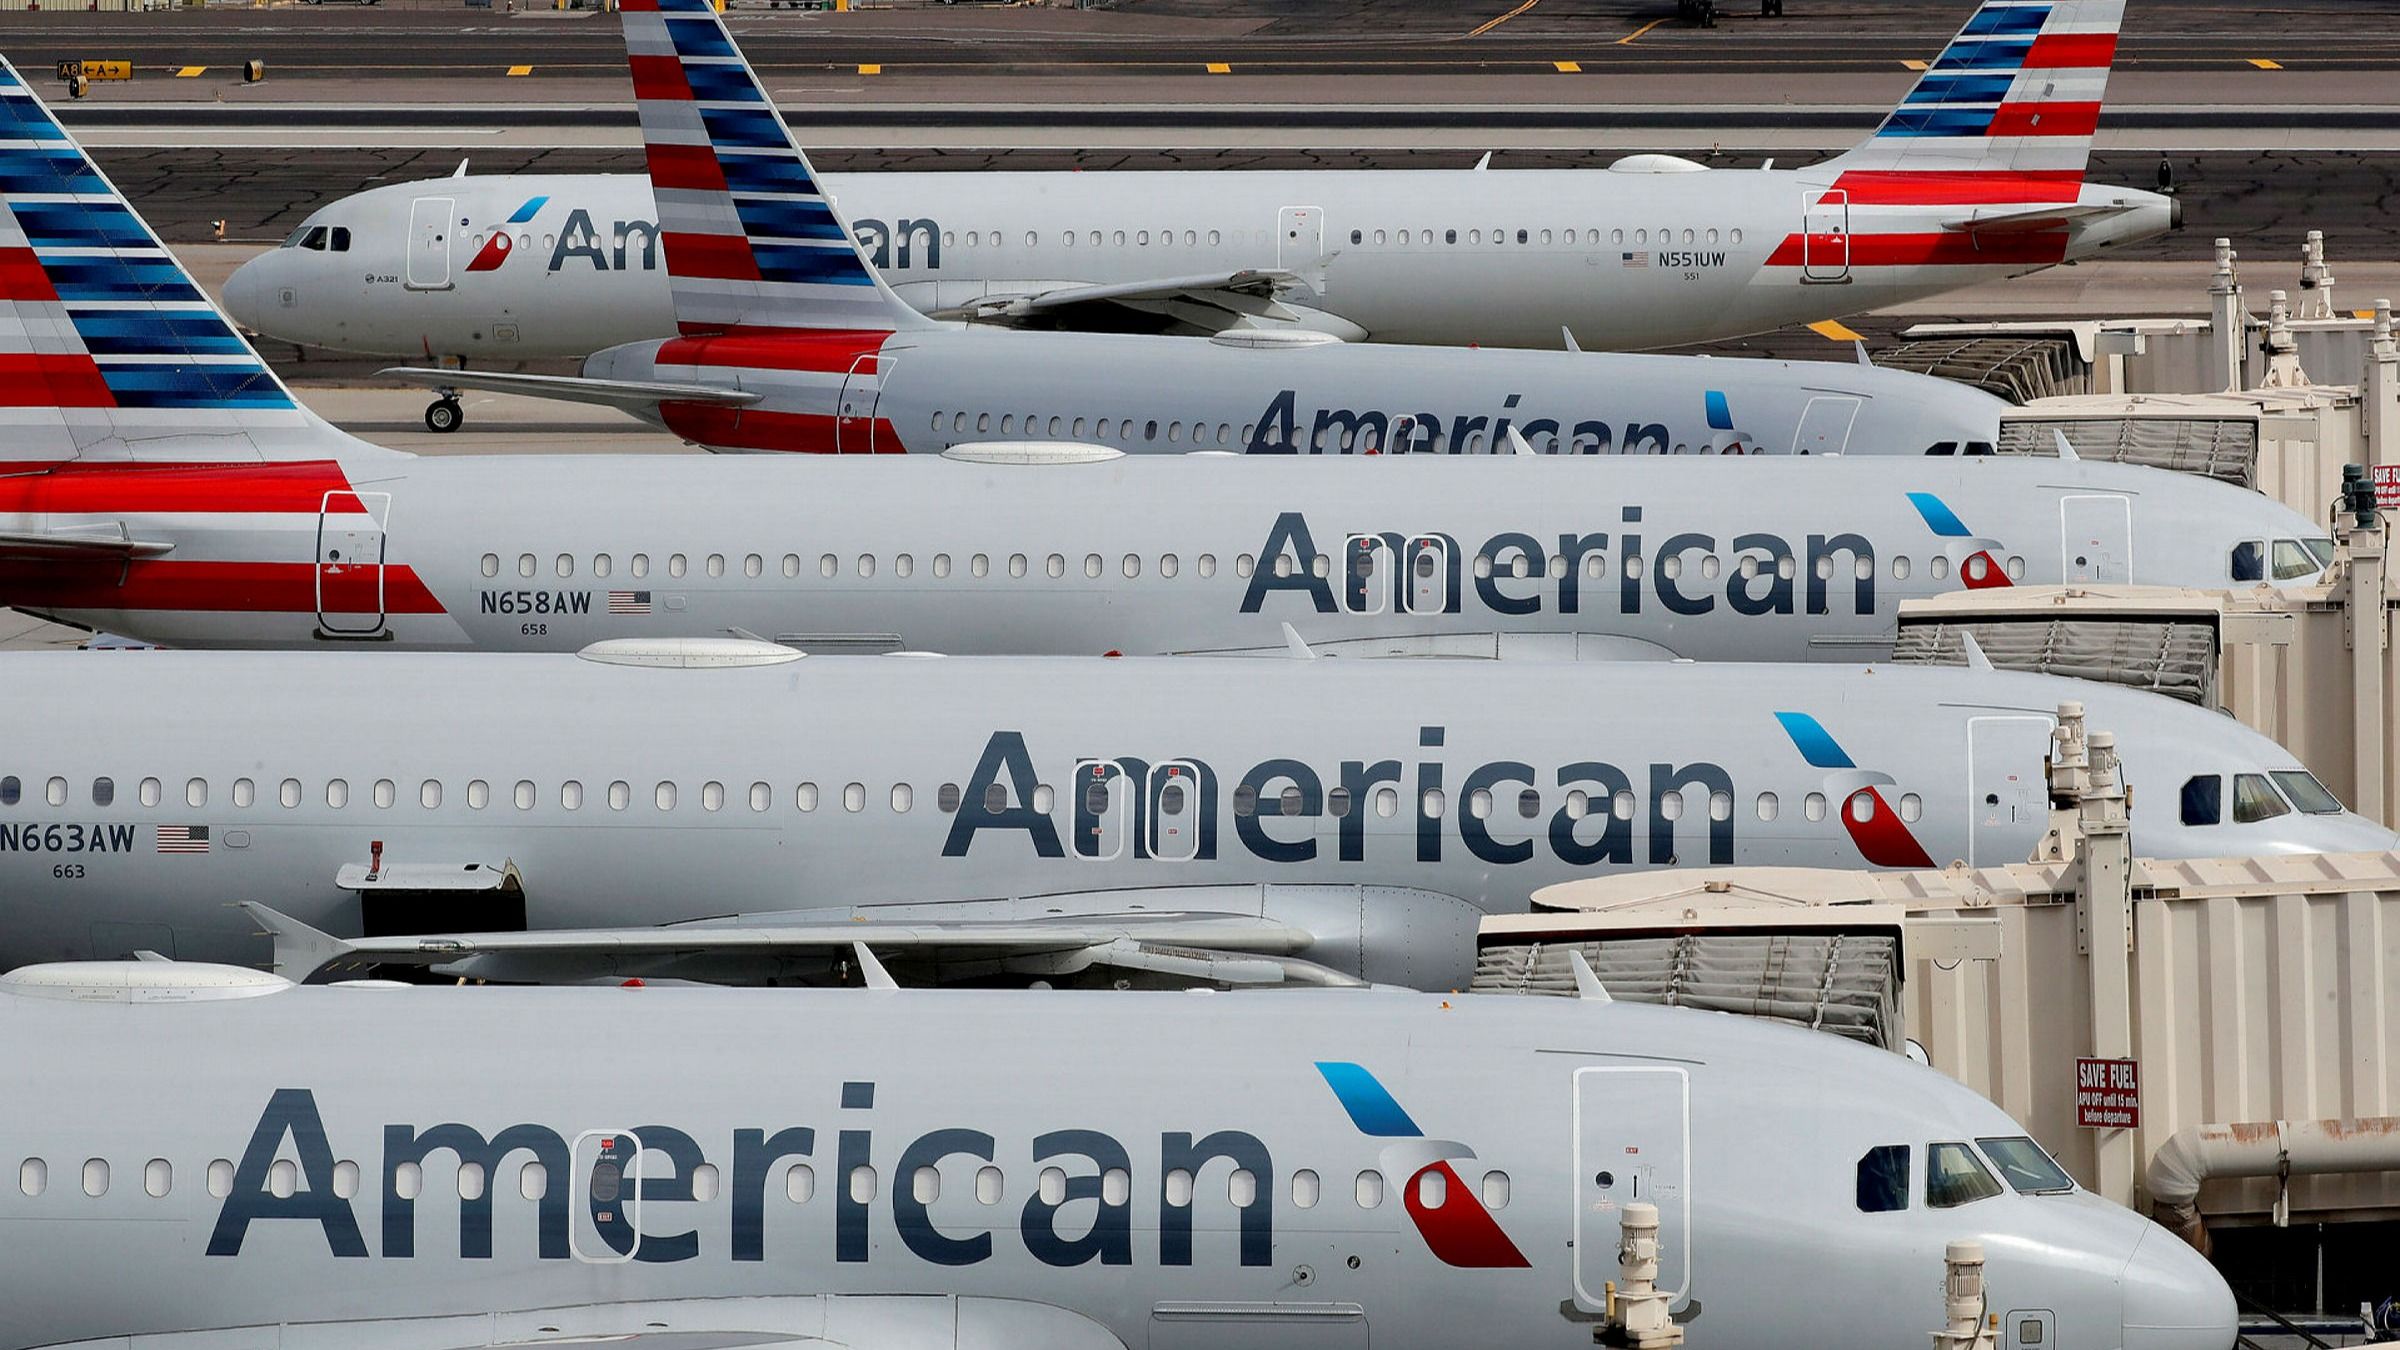 The American Airlines mass cancellation problem